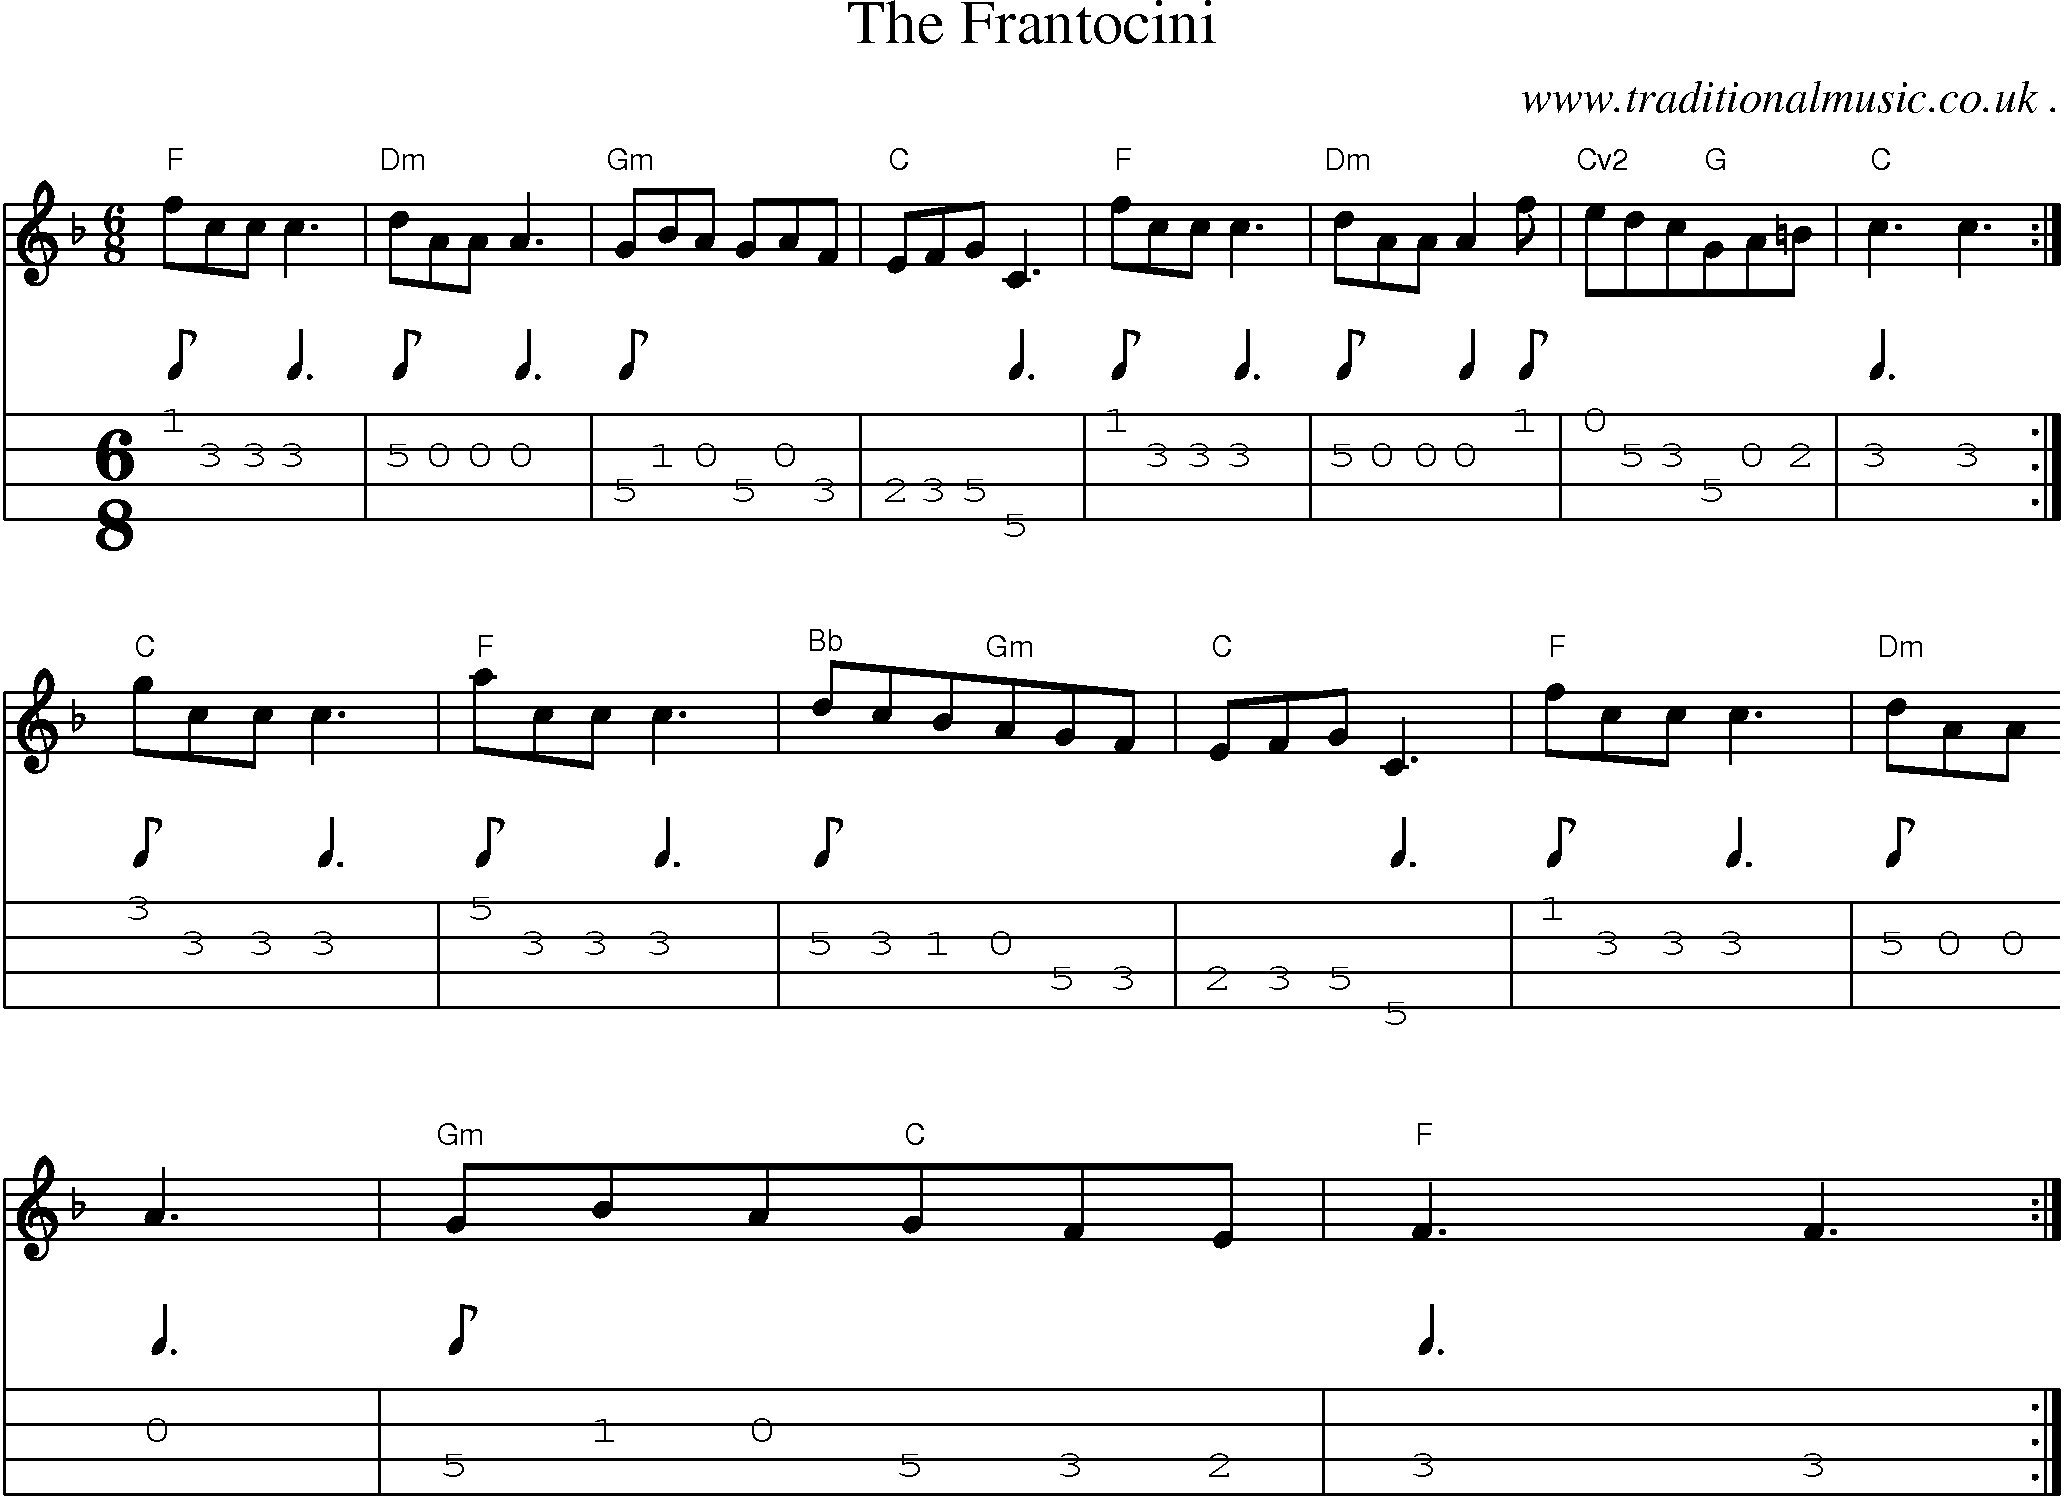 Sheet-Music and Mandolin Tabs for The Frantocini